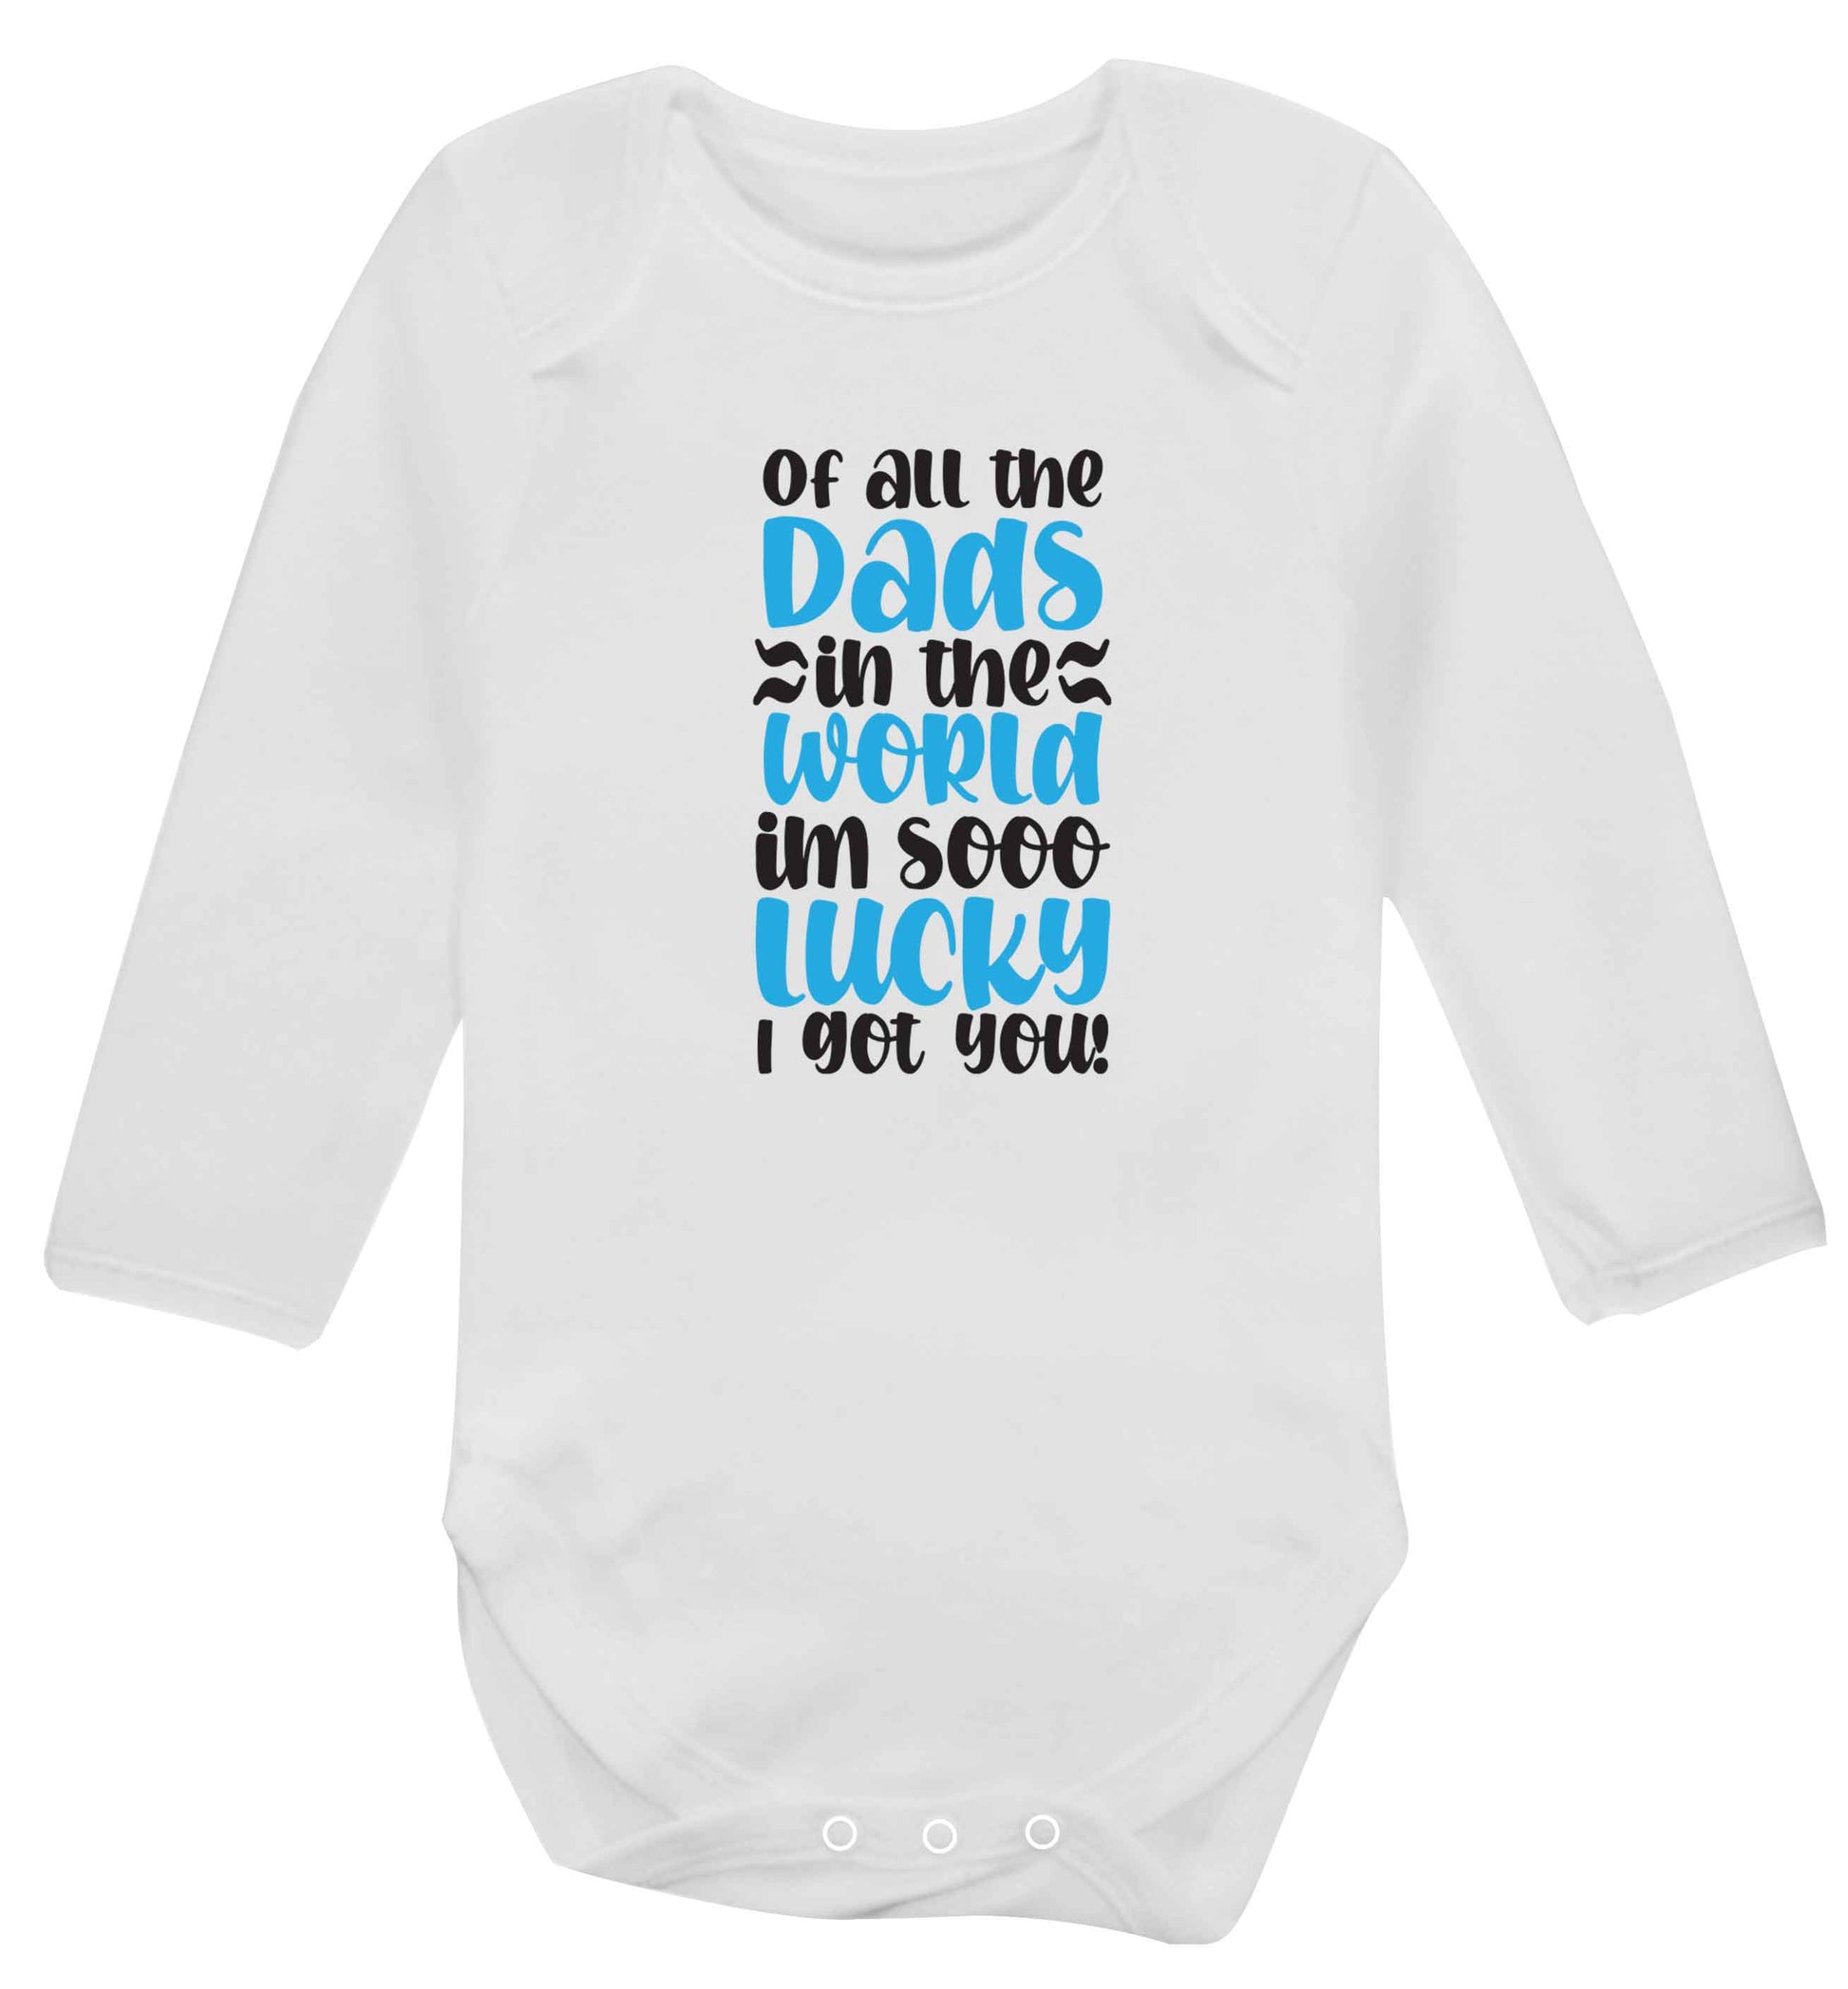 I'm as lucky as can be the worlds greatest dad belongs to me! baby vest long sleeved white 6-12 months